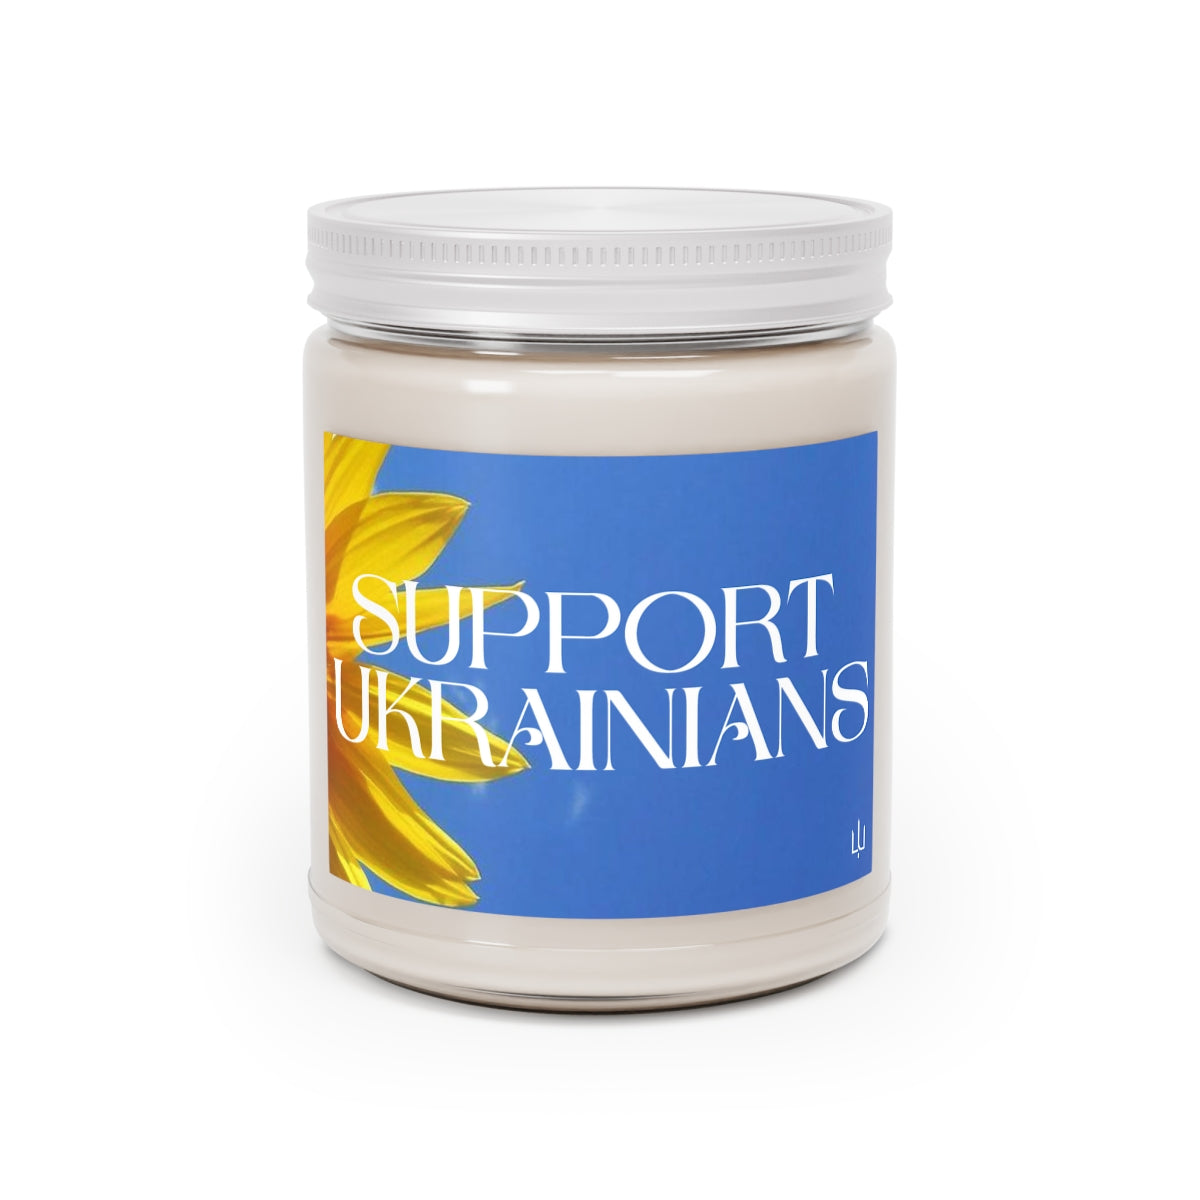 Support Ukrainians - 100% Soy Wax Scented Candle (lasts 50-60h)